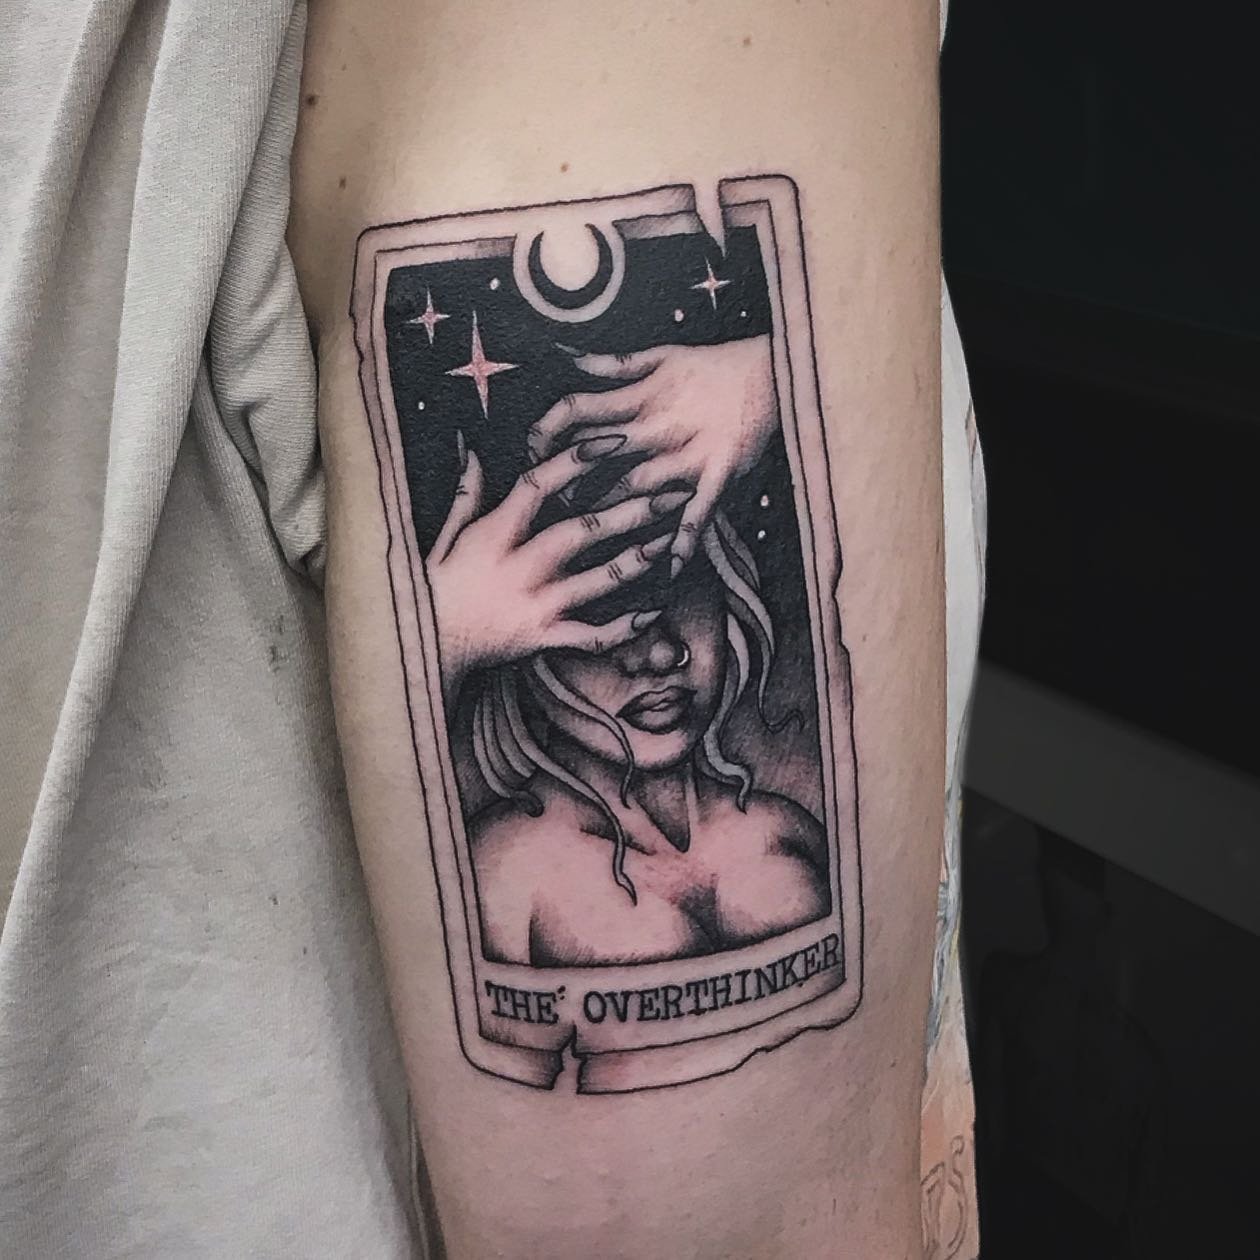 The Overthinker, for @adina_rad17 🃏&hearts;️
Thankyou so much!
Made at @mans_ruin_tattoo, messages always welcome.

#tarotcard #tarottattoo #tarot #witchythings #blackandgreytattoo #melbournetattoo #melbournetattooist #dynamicink